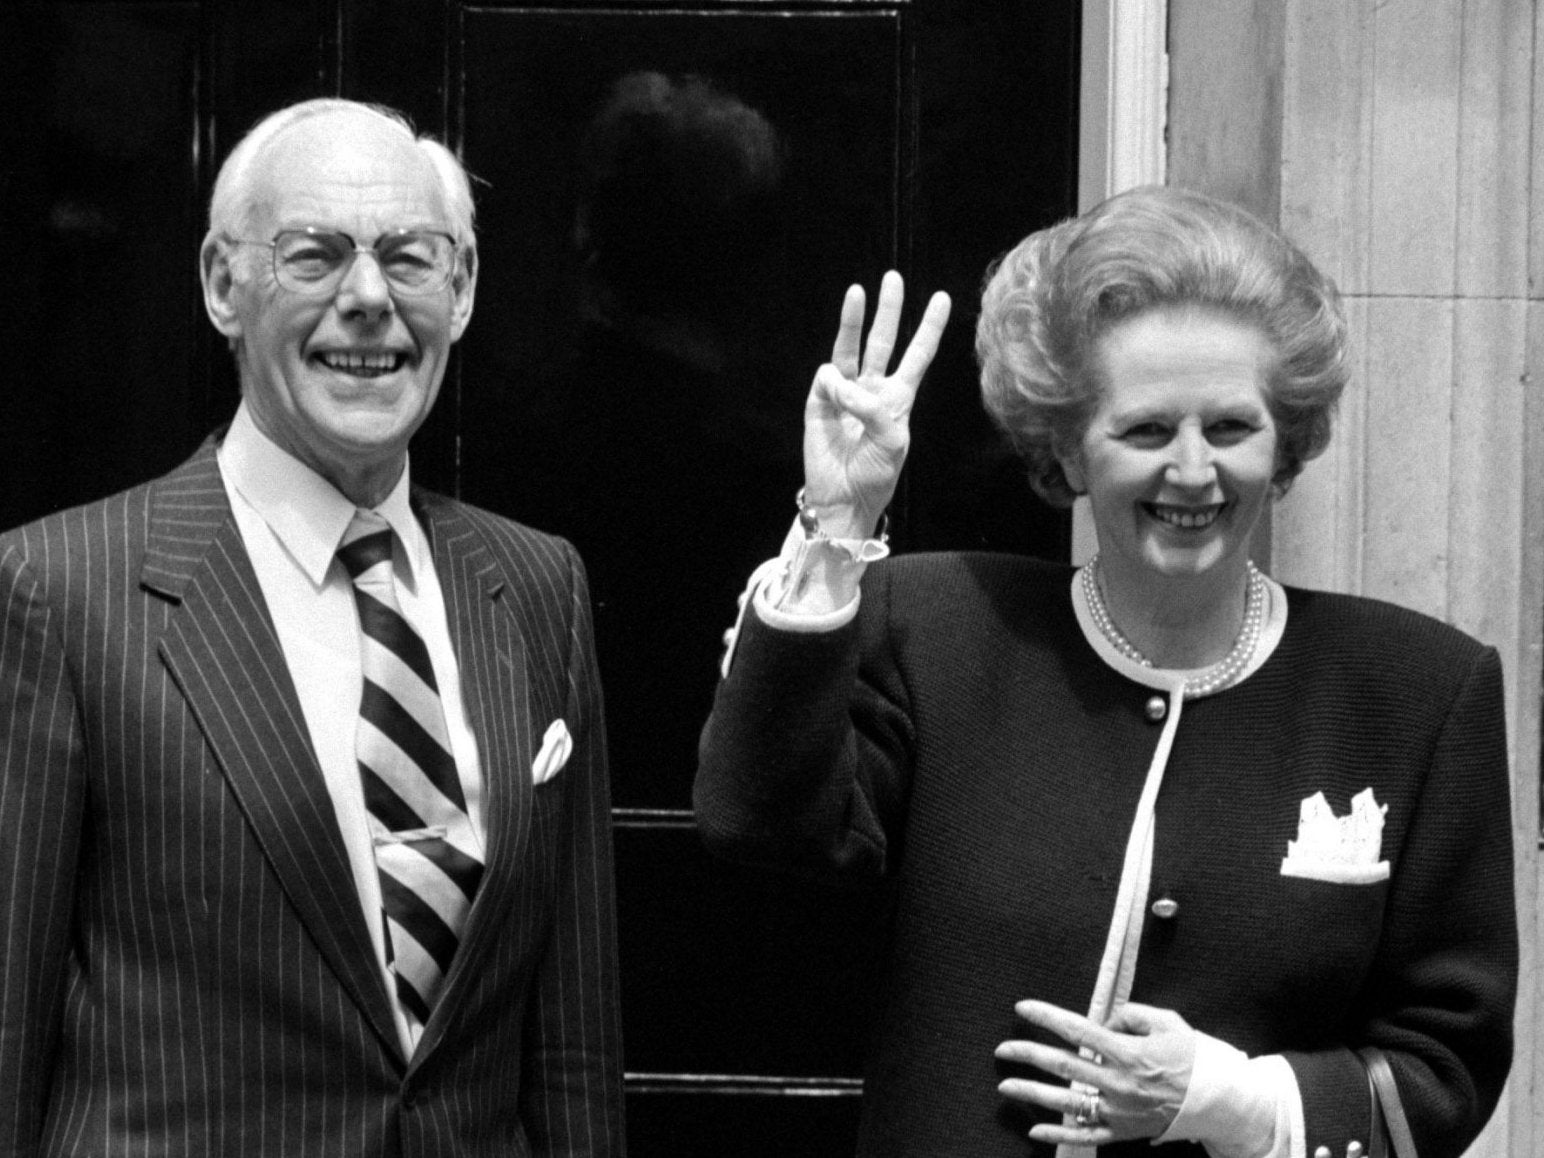 David Attenborough and Paul McCartney rejected by Denis Thatcher for Downing Street party